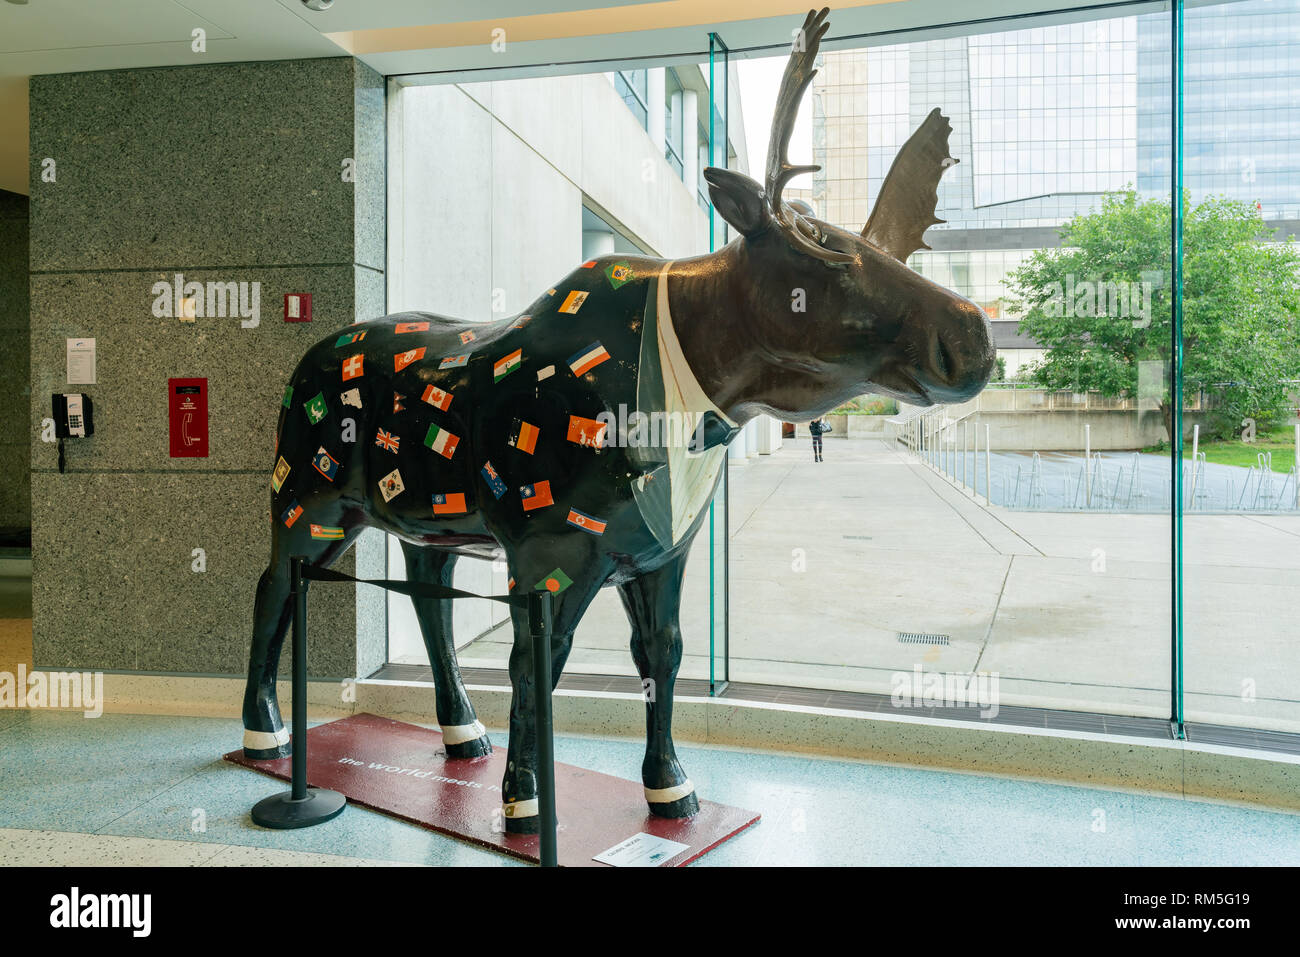 Toronto, SEP 29: Elk statue with many country flags inside the Metro Toronto Convention Centre on SEP 29, 2018 at Toronto, Canada Stock Photo